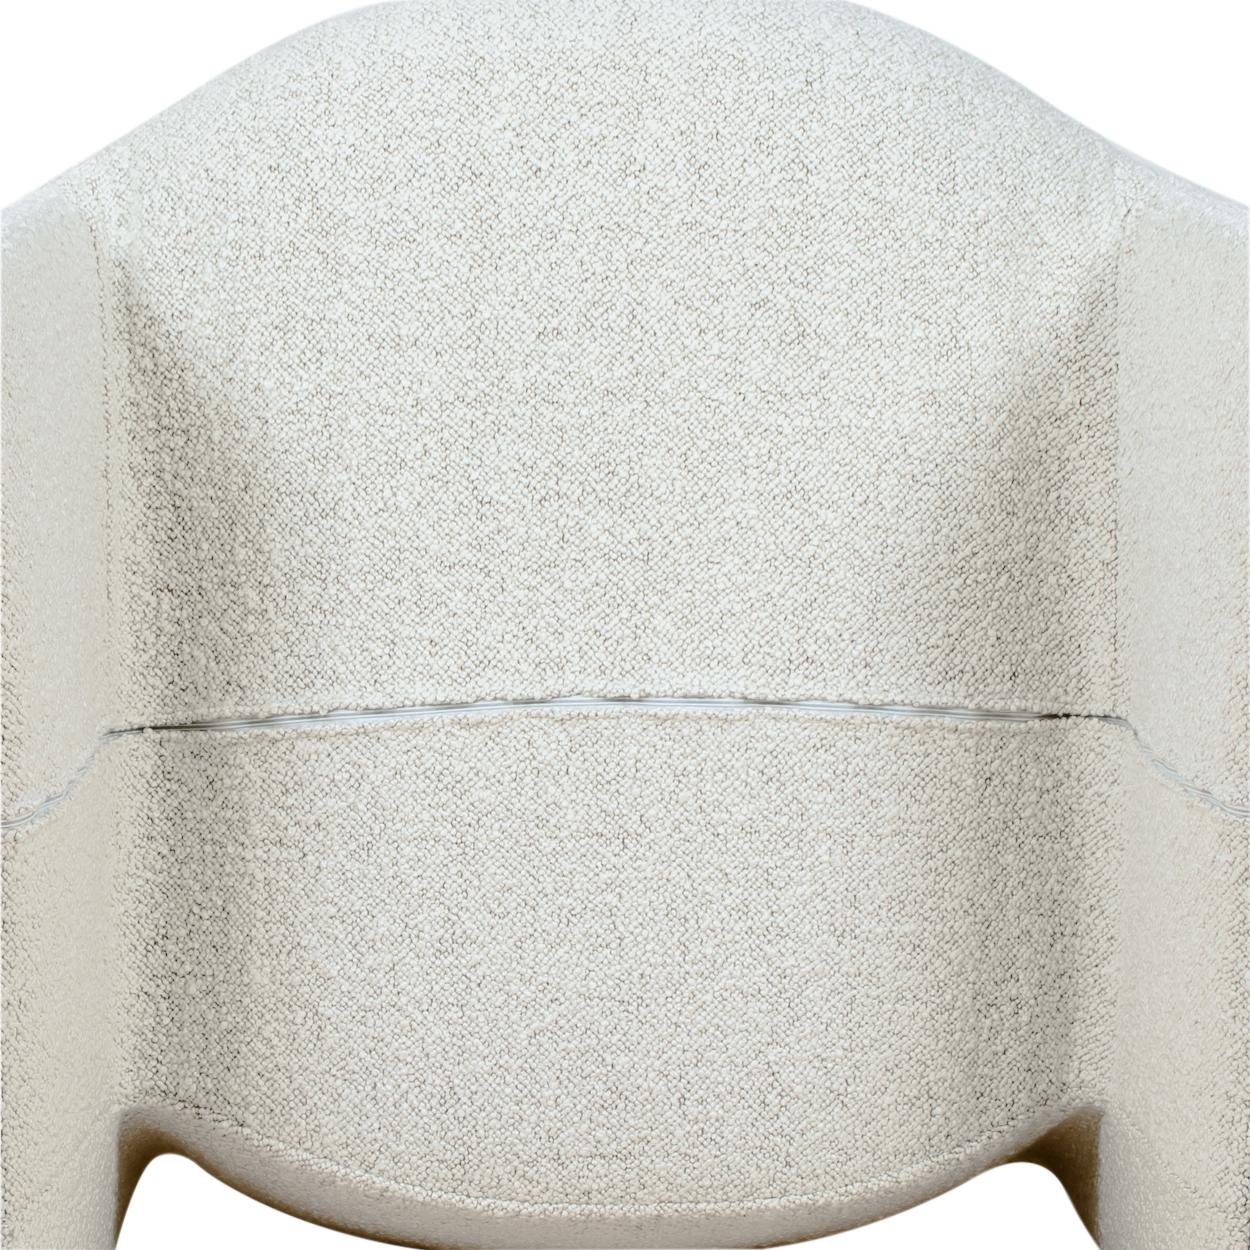 Pair of “Alky” Chairs by G. Piretti for Castelli New Upholstery Boucle by Dedar 1